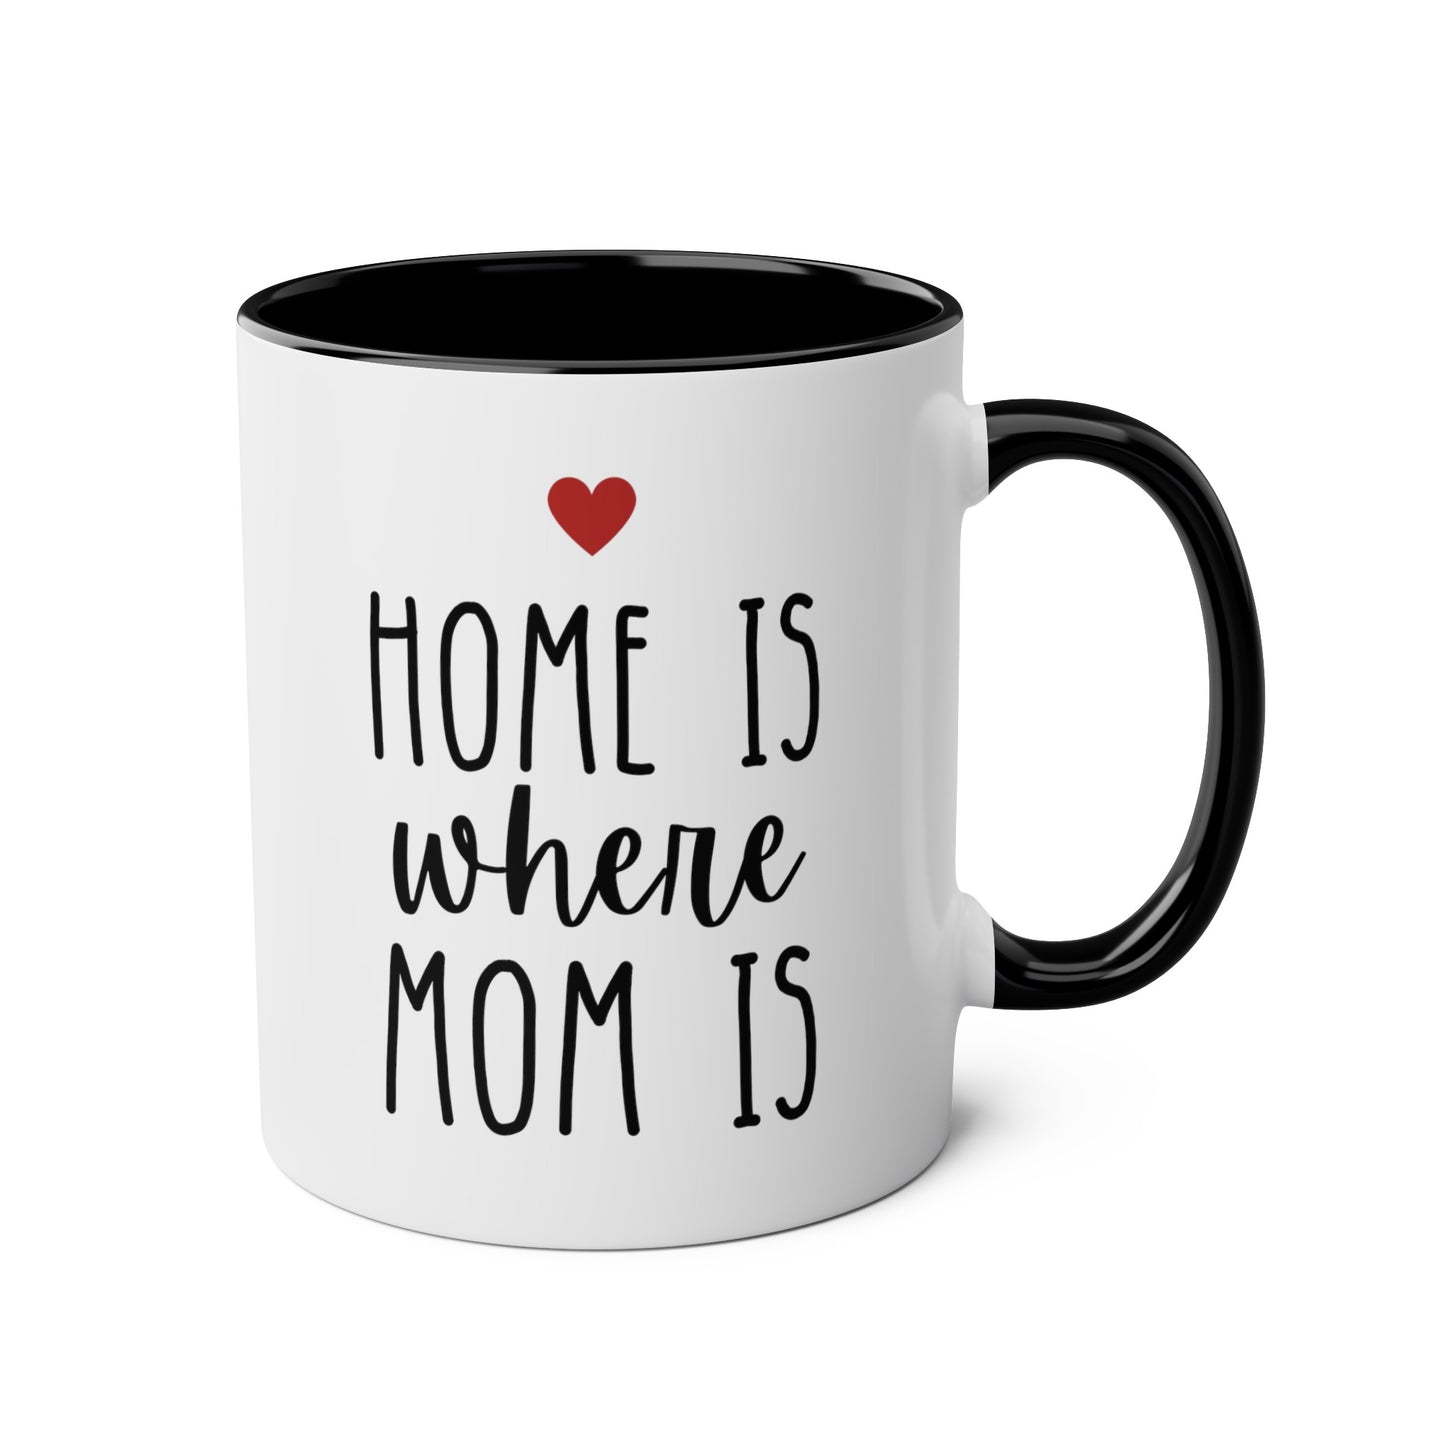 Home Is Where Mom Is 11oz white with black accent funny coffee mug tea cup gift for mother's day moving states away housewarming long distance mum waveywares wavey wares wavywares wavy wares